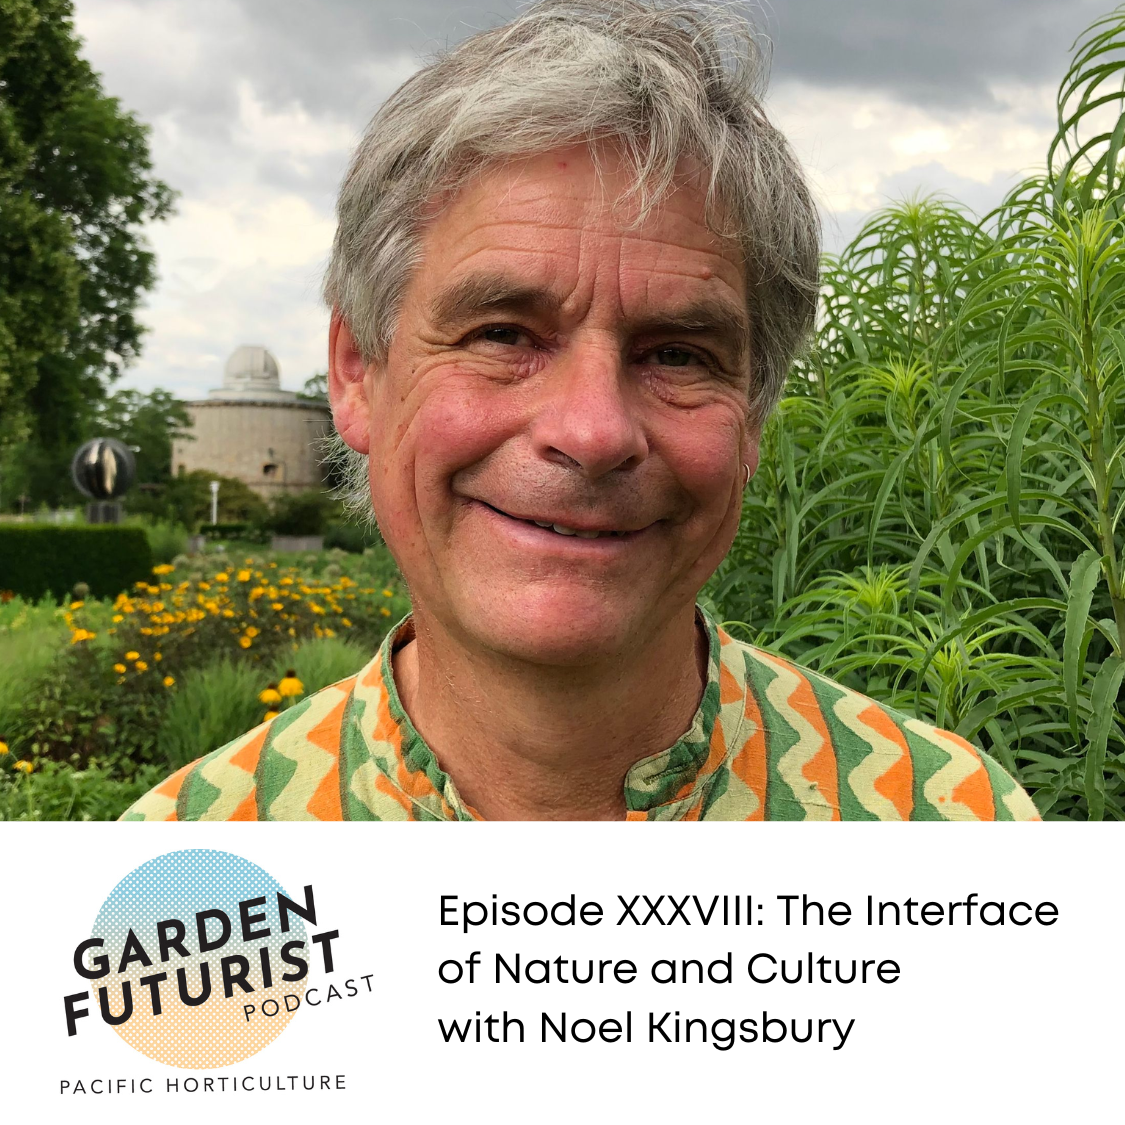 Garden Futurist Podcast: Episode XXXVIII: The Interface of Nature and Culture with Noel Kingsbury